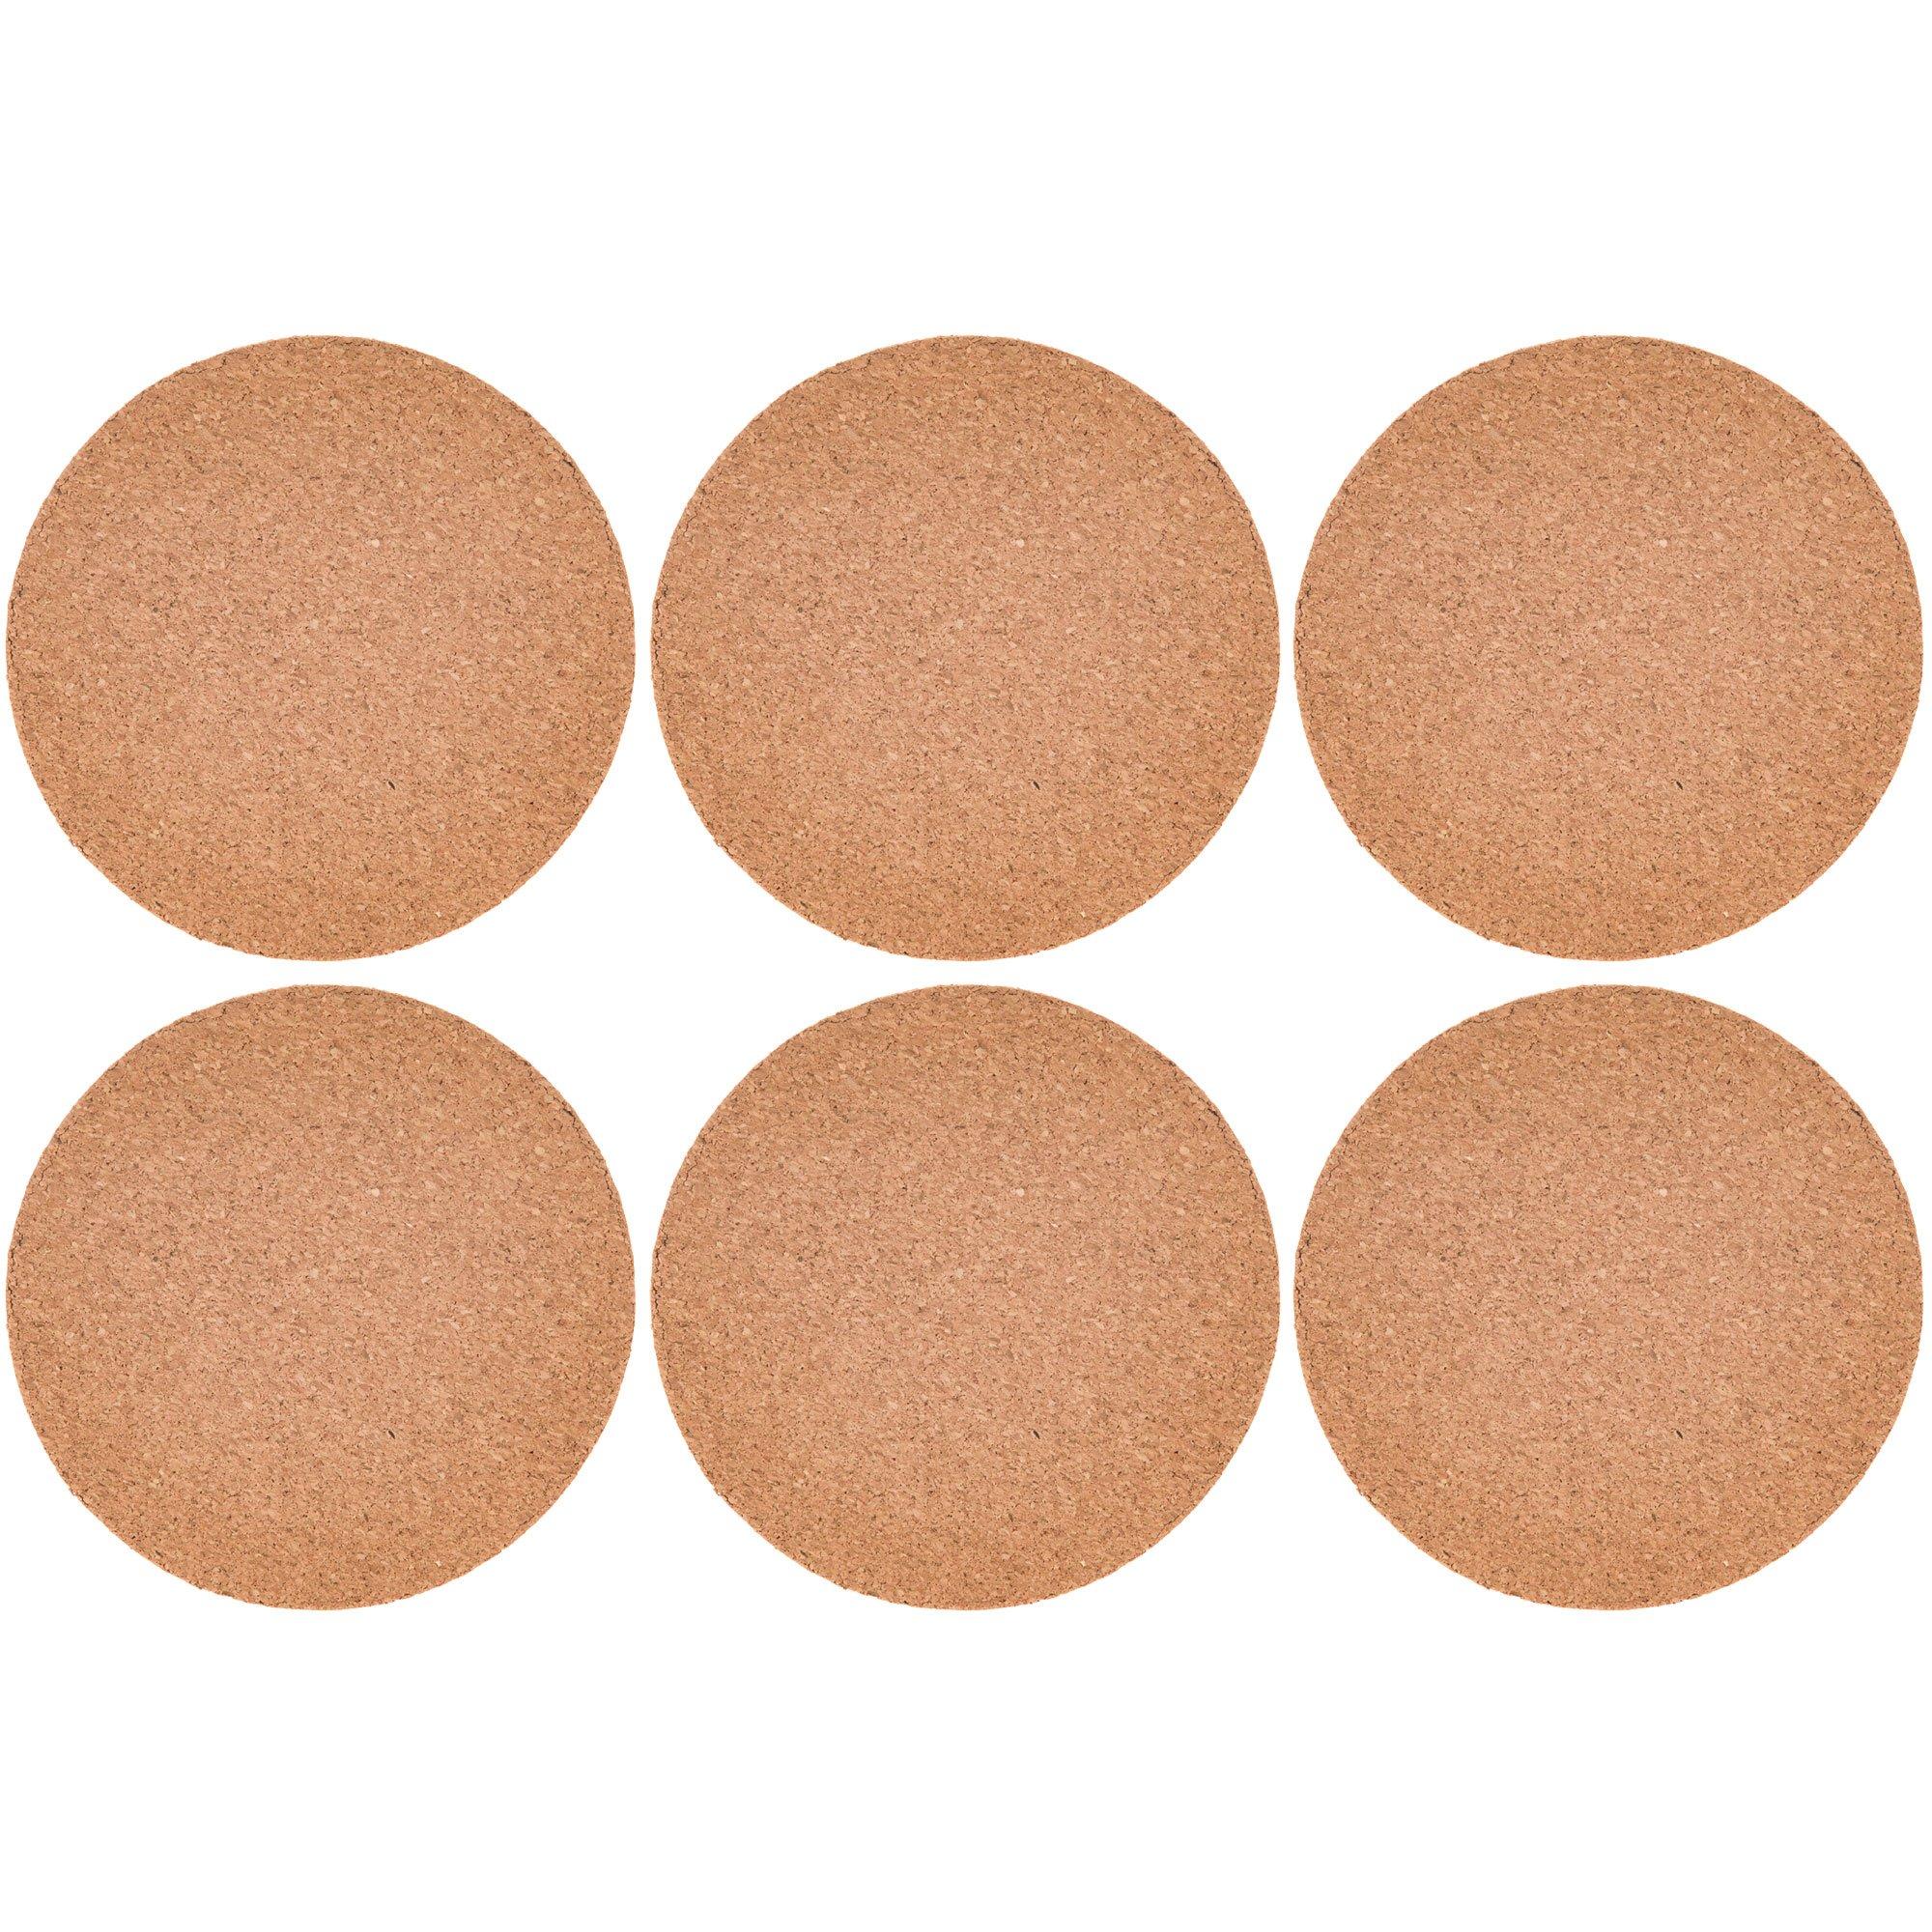 Double Sided Round Cork Coasters